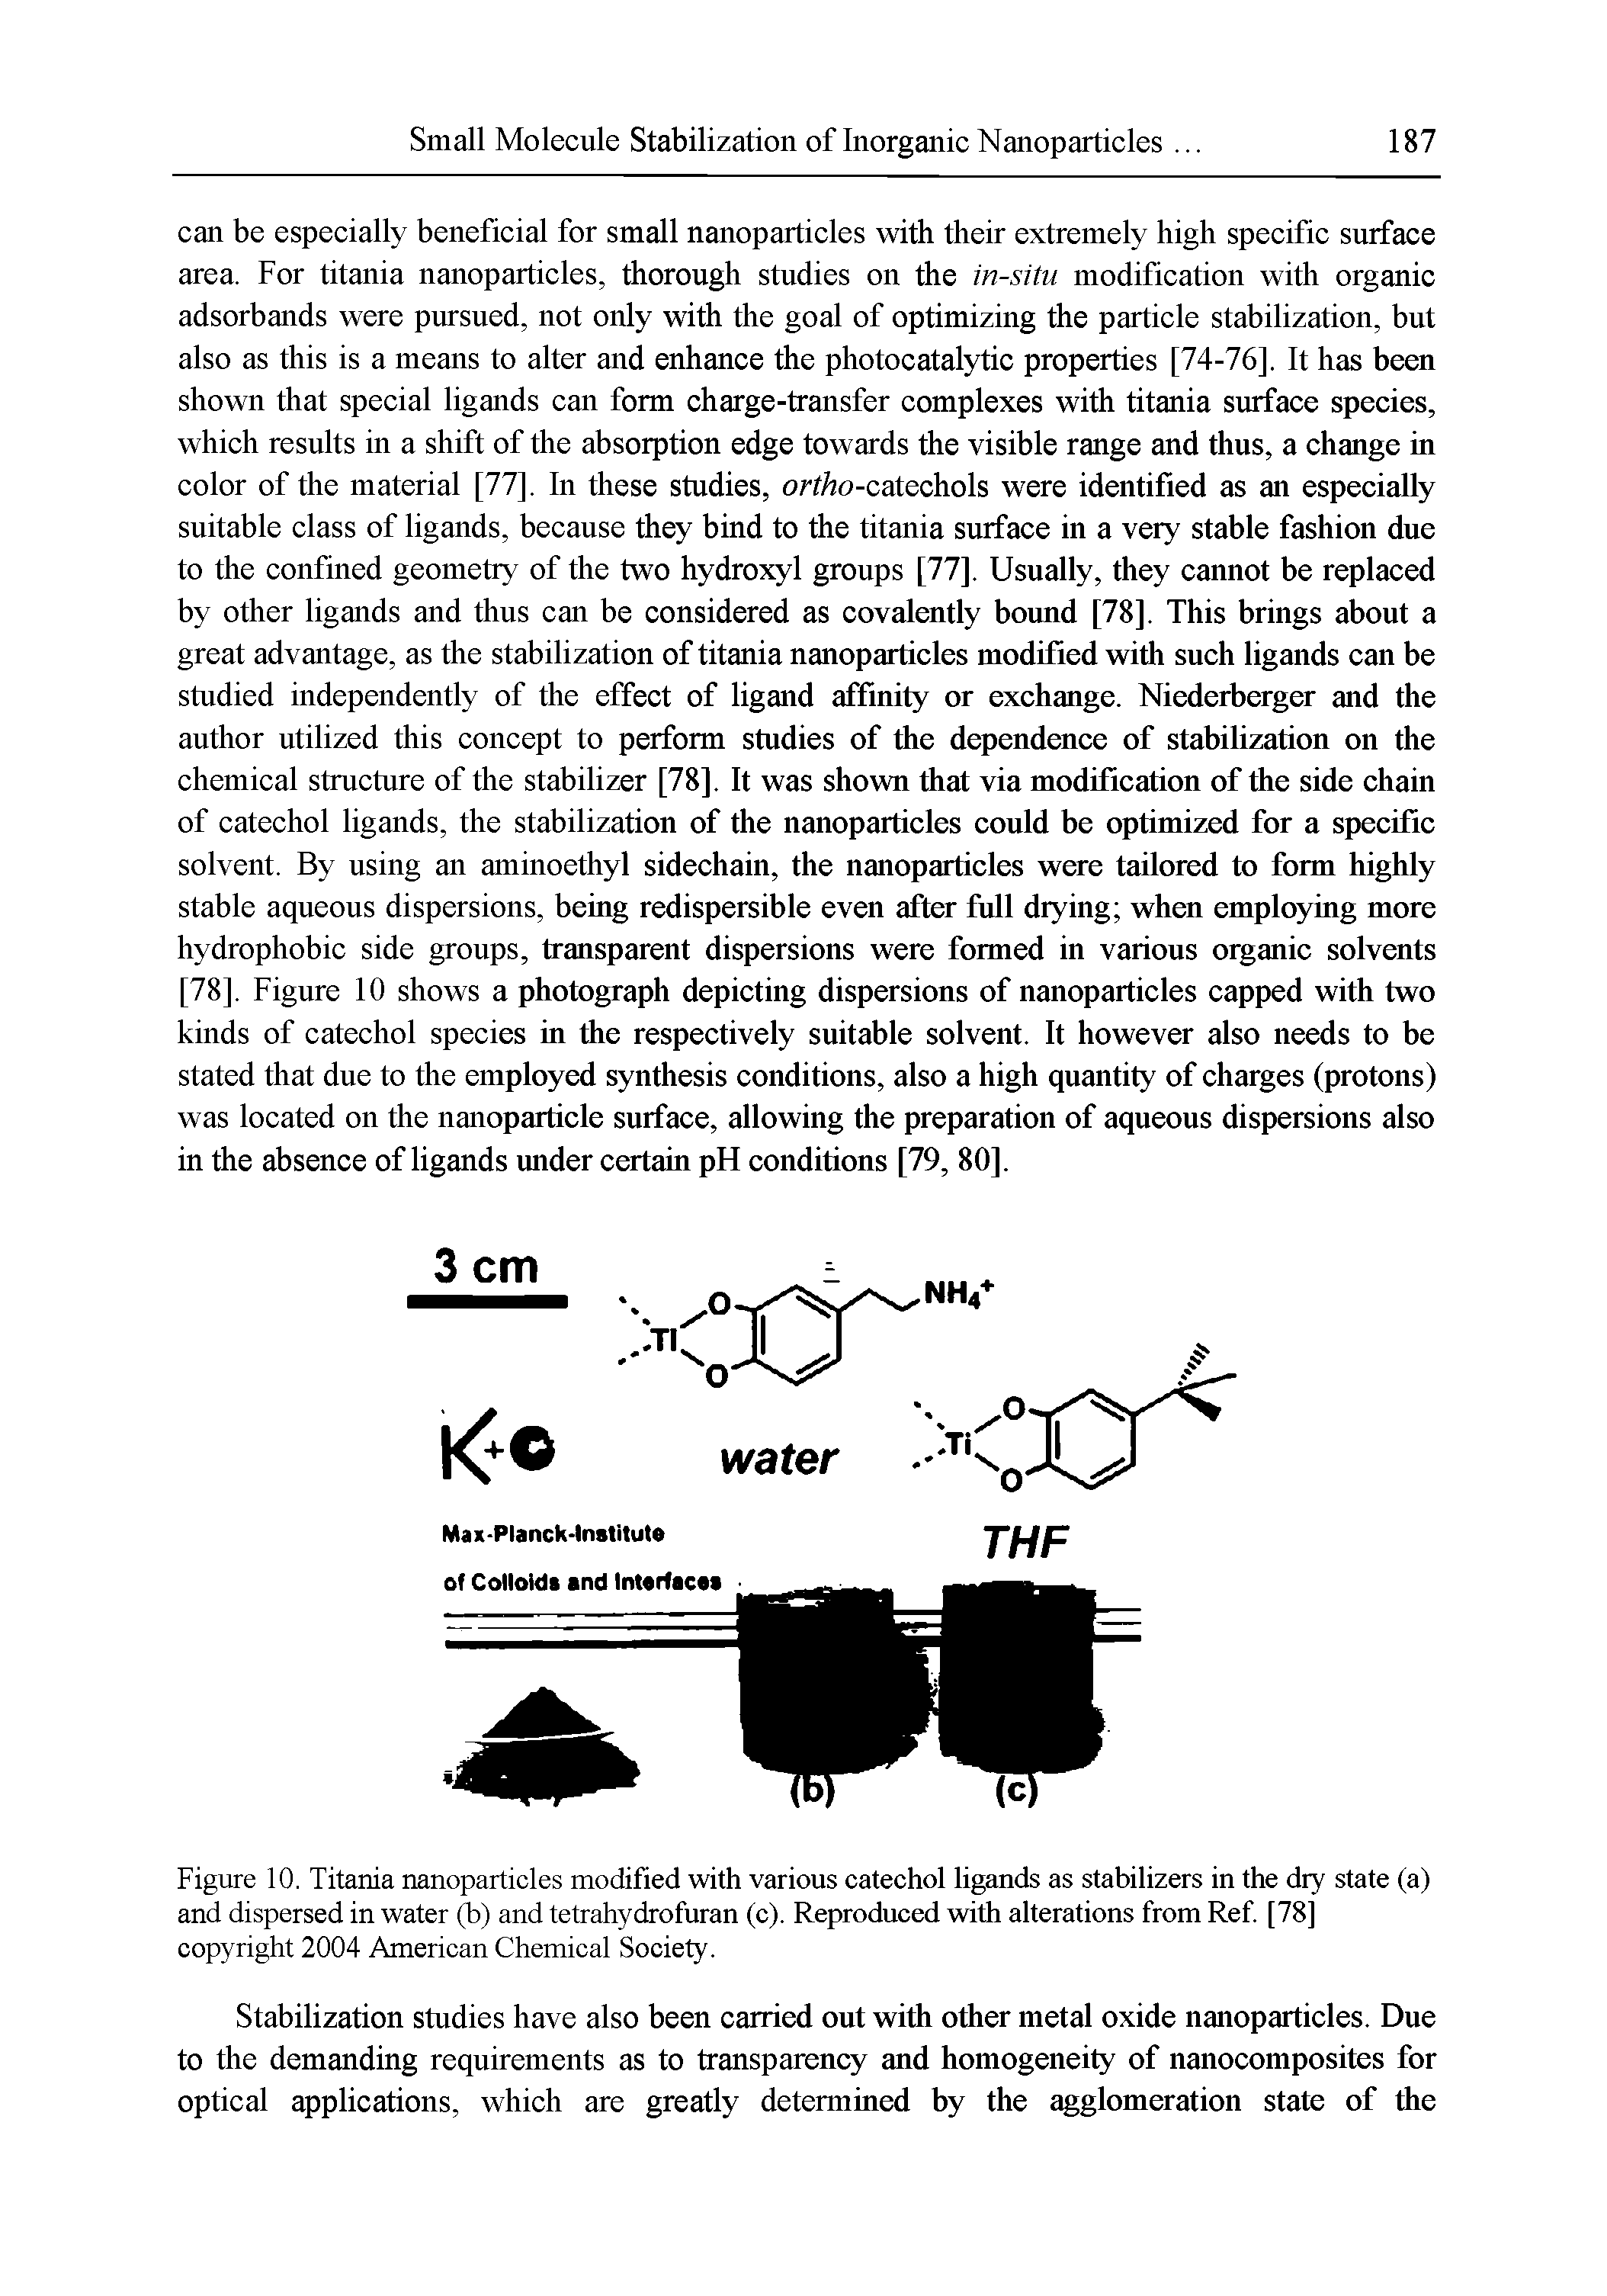 Figure 10. Titania nanoparticles modified with various catechol ligands as stabilizers in the dry state (a) and dispersed in water (b) and tetrahydrofuran (c). Reproduced with alterations from Ref. [78] copyright 2004 American Chemical Society.